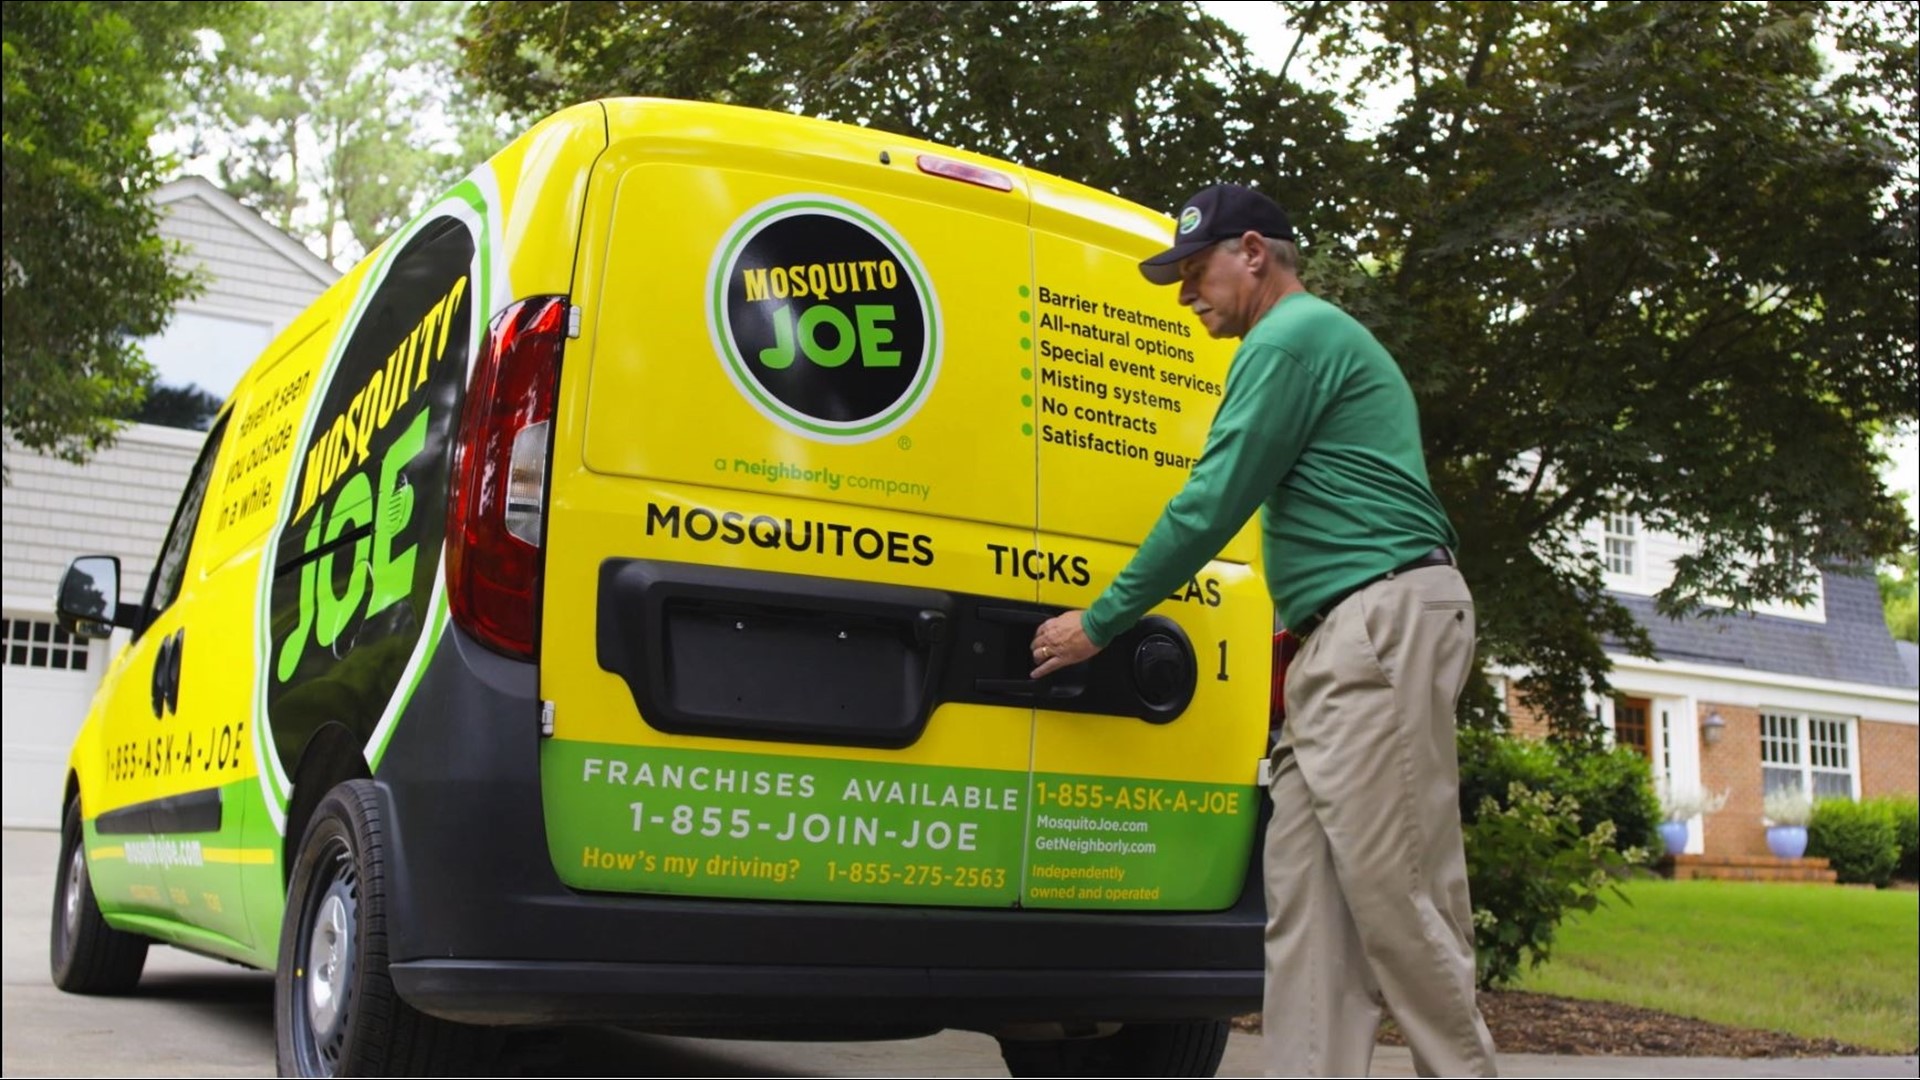 Do not let pests get in the way of making memories outdoors this summer. Call the experts at Mosquito Joe, today!